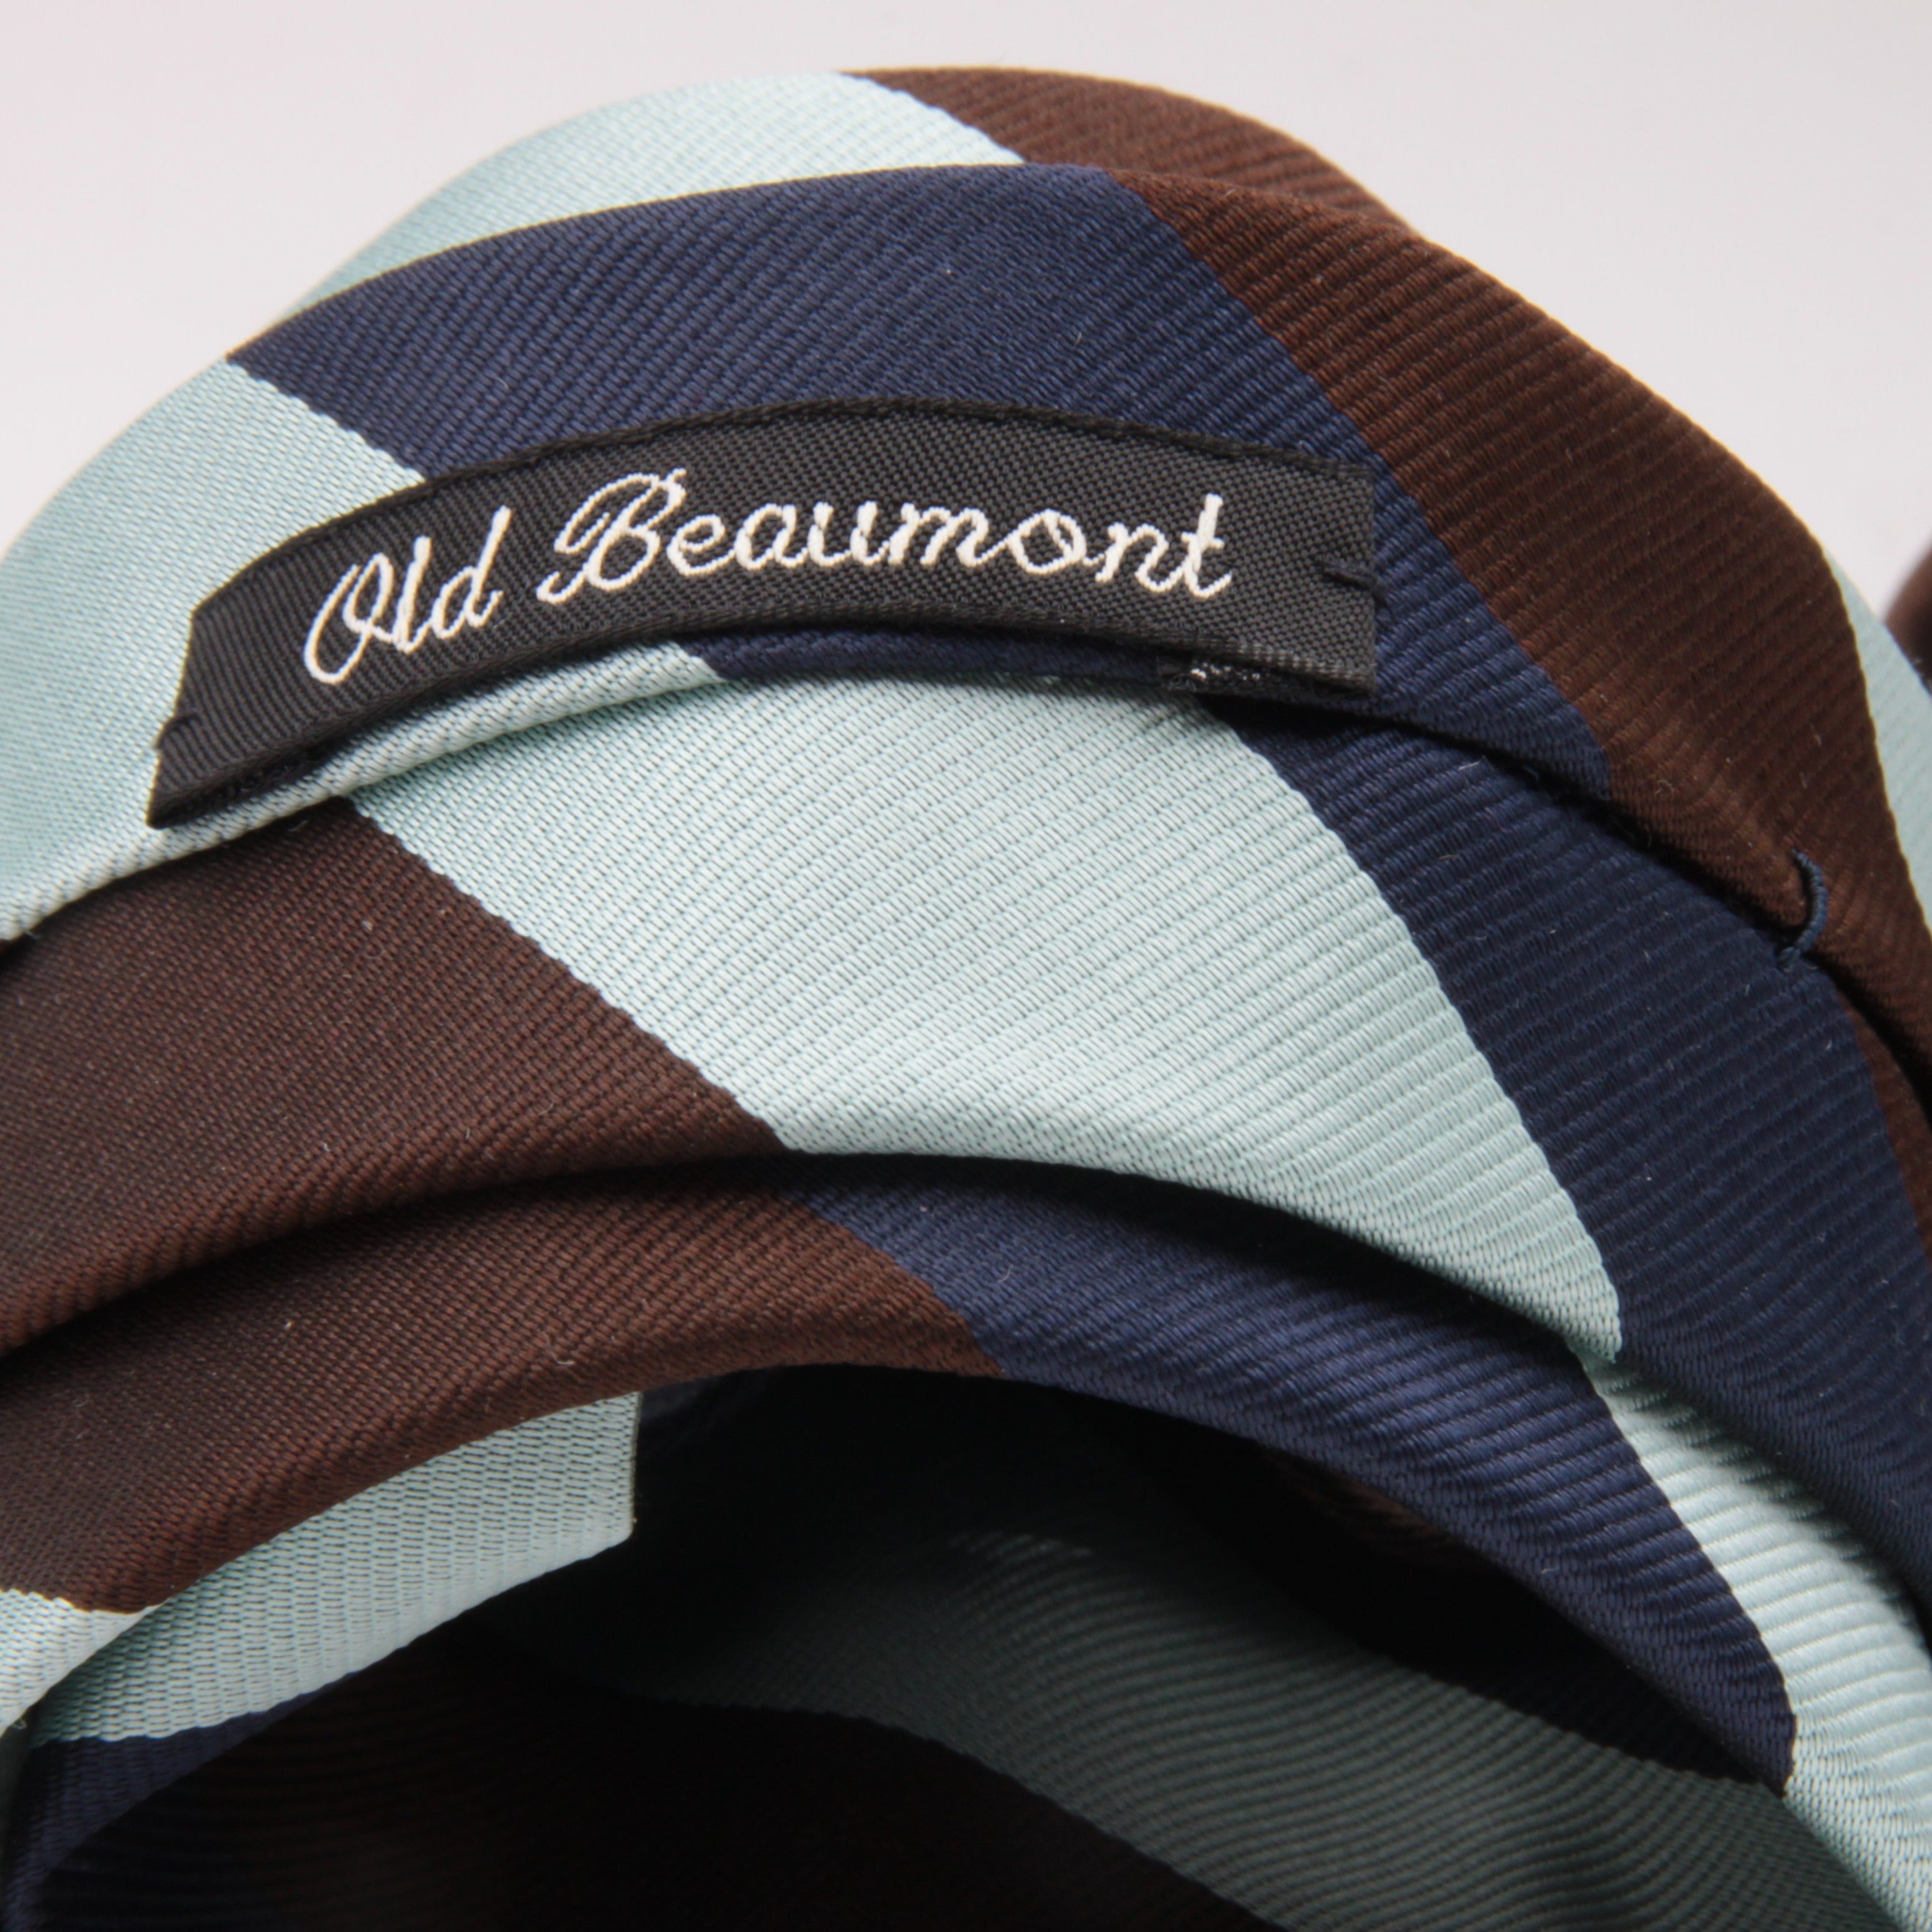 Holliday & Brown for Cruciani & Bella 100% Silk Jacquard  Regimental "Old Beaumont" Blue, Brown and Light Blue stripes tie Handmade in Italy 8 cm x 150 cm #5116